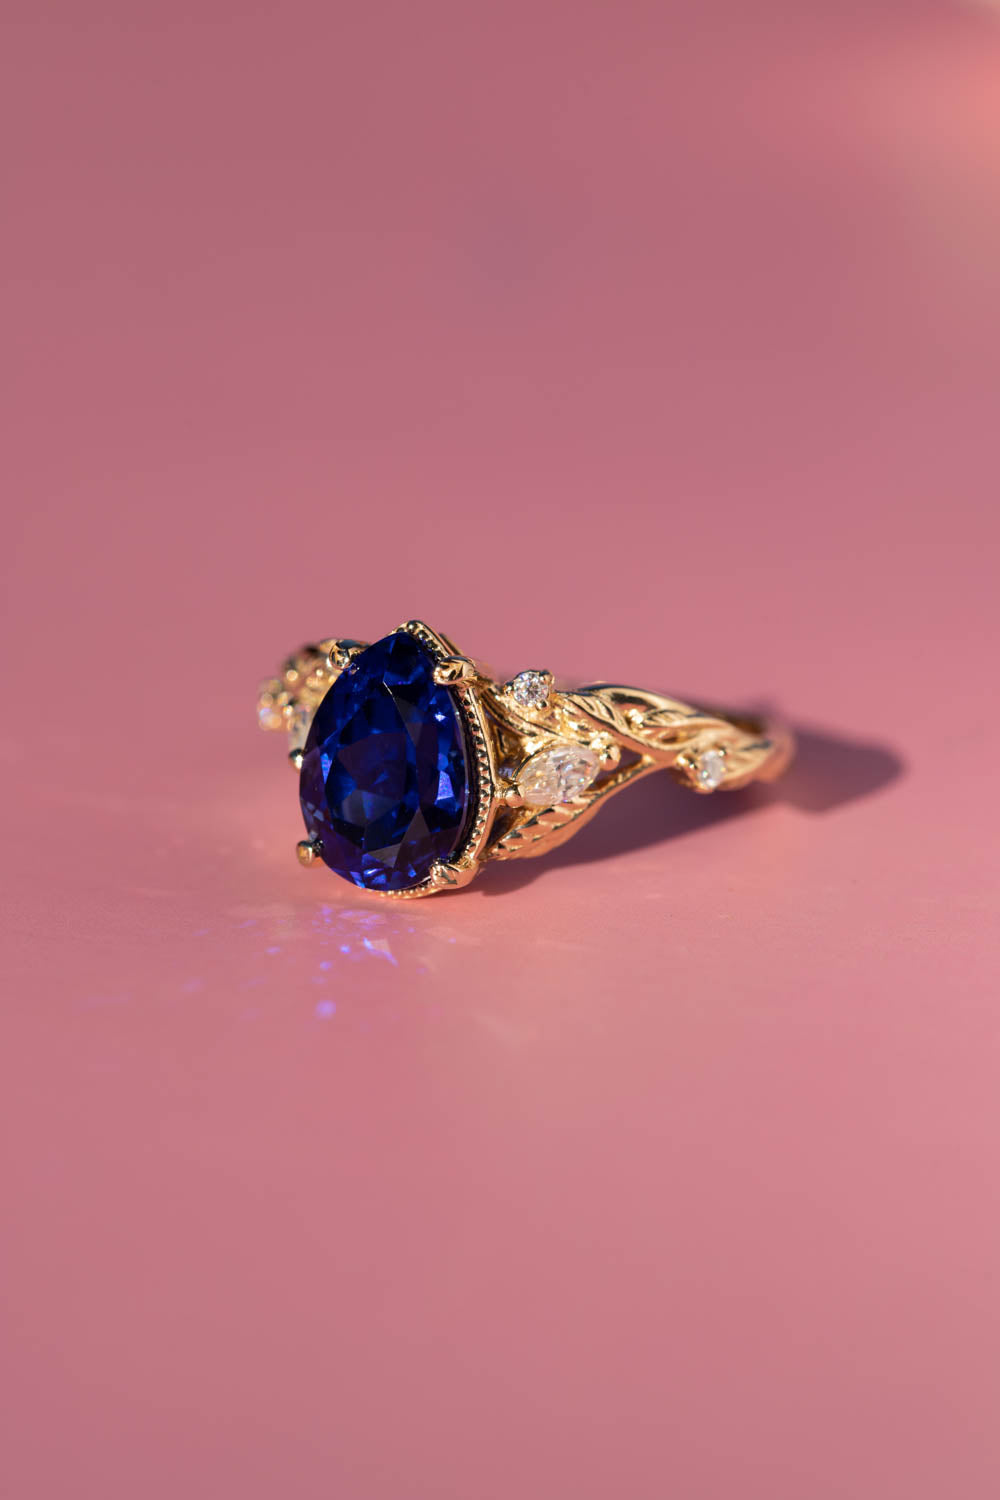 Pear sapphire twig engagement ring, royal blue lab sapphire proposal ring with diamonds / Patricia - Eden Garden Jewelry™